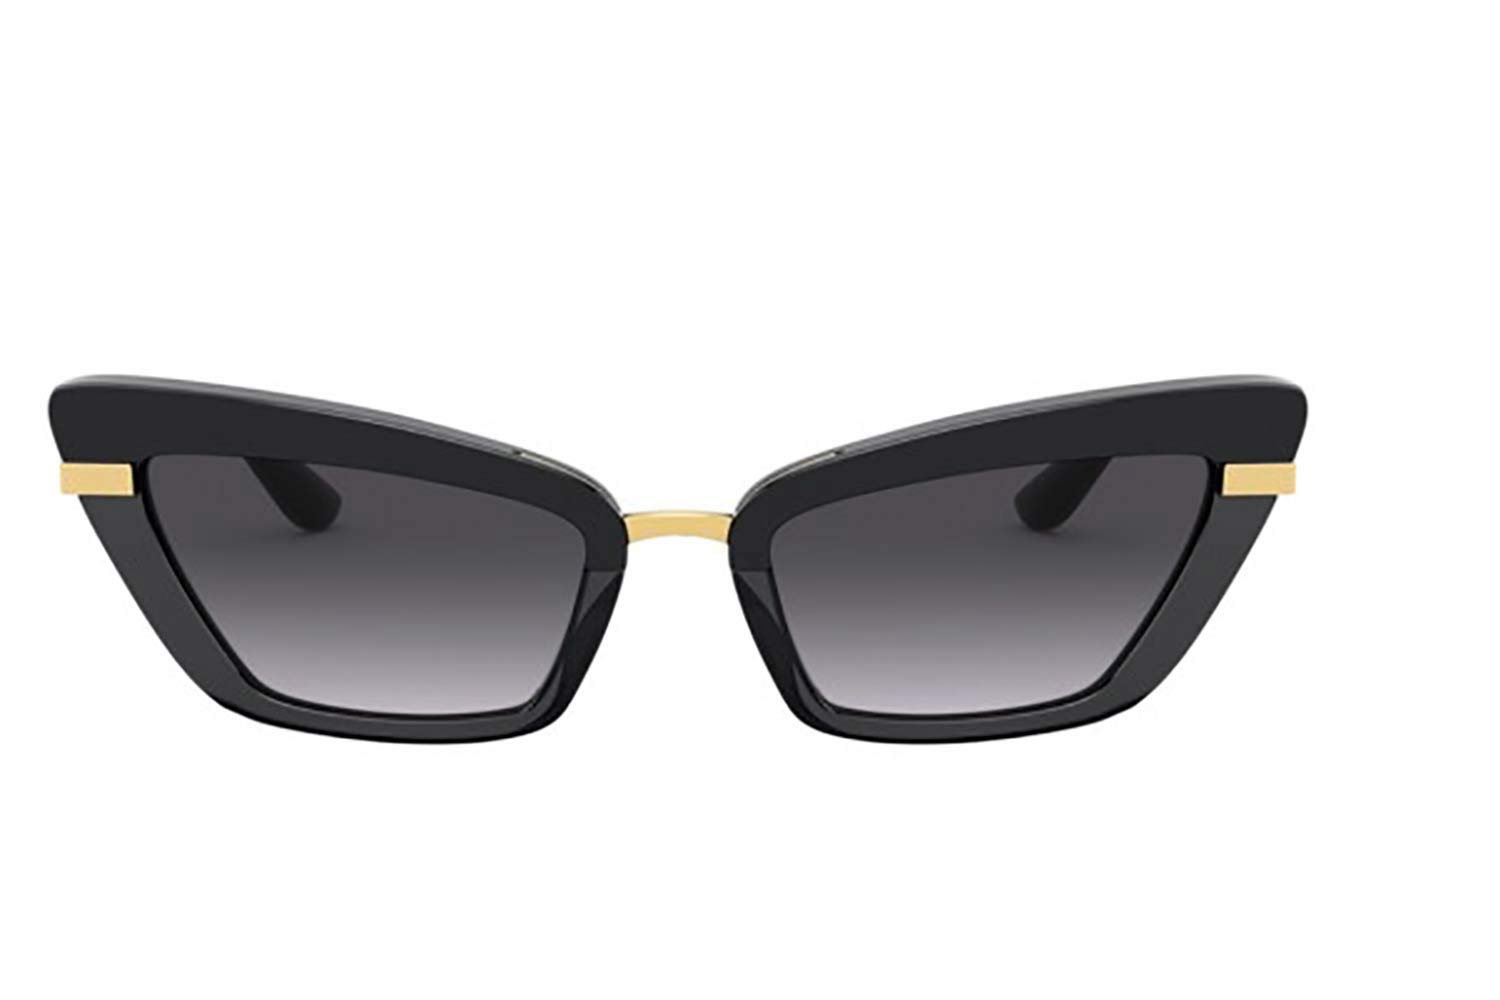 dolce gabbana sunglasses new collection